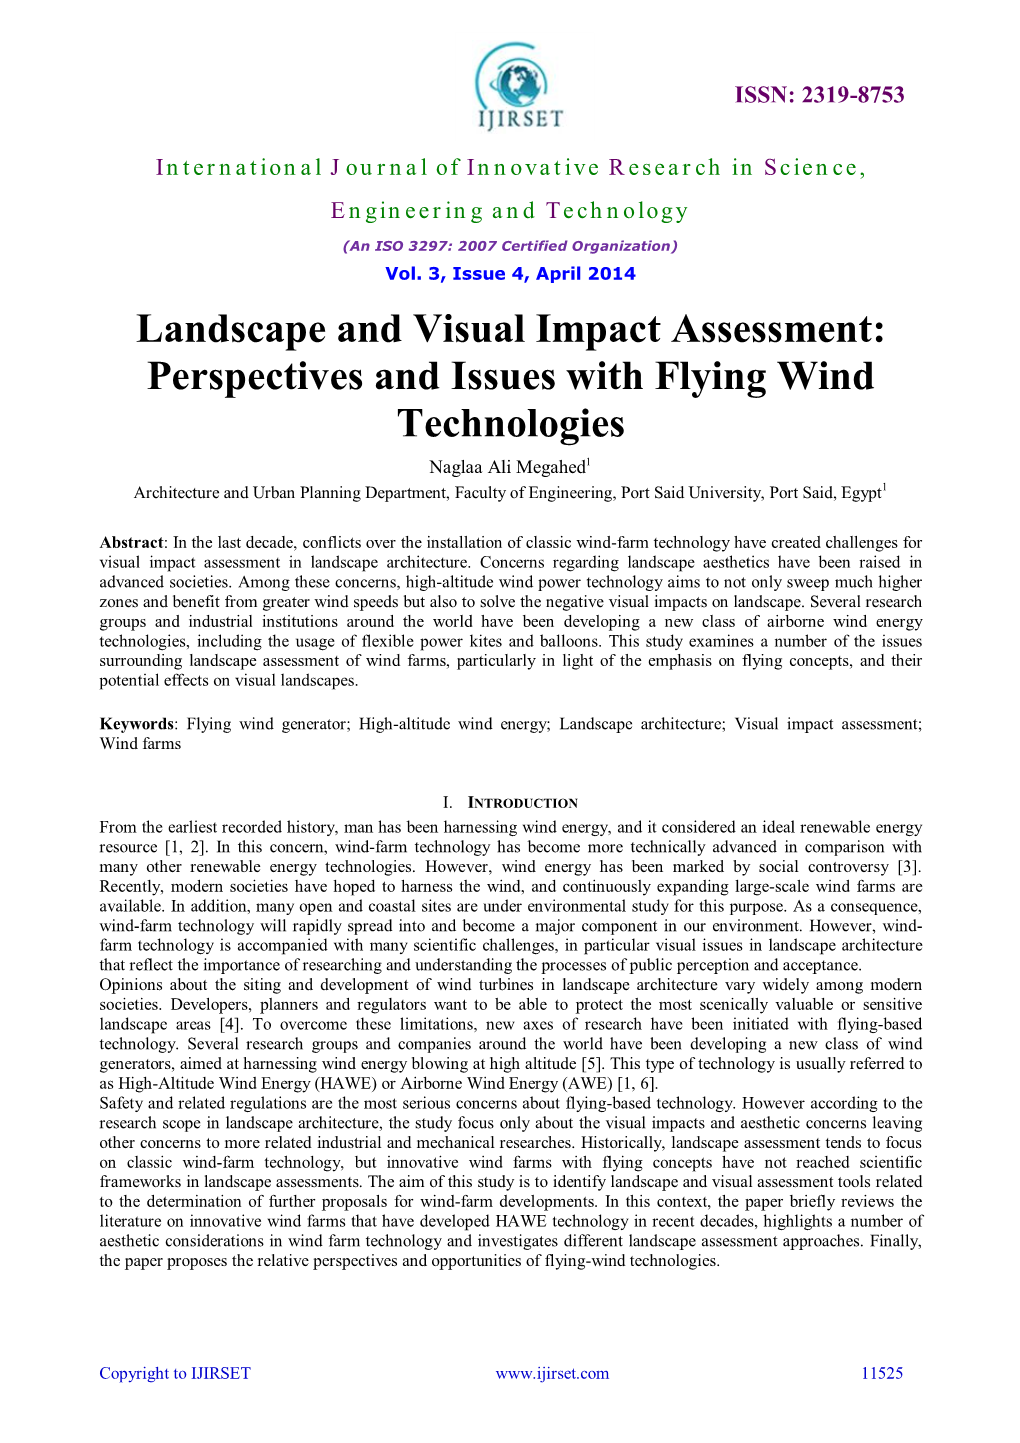 Landscape and Visual Impact Assessment